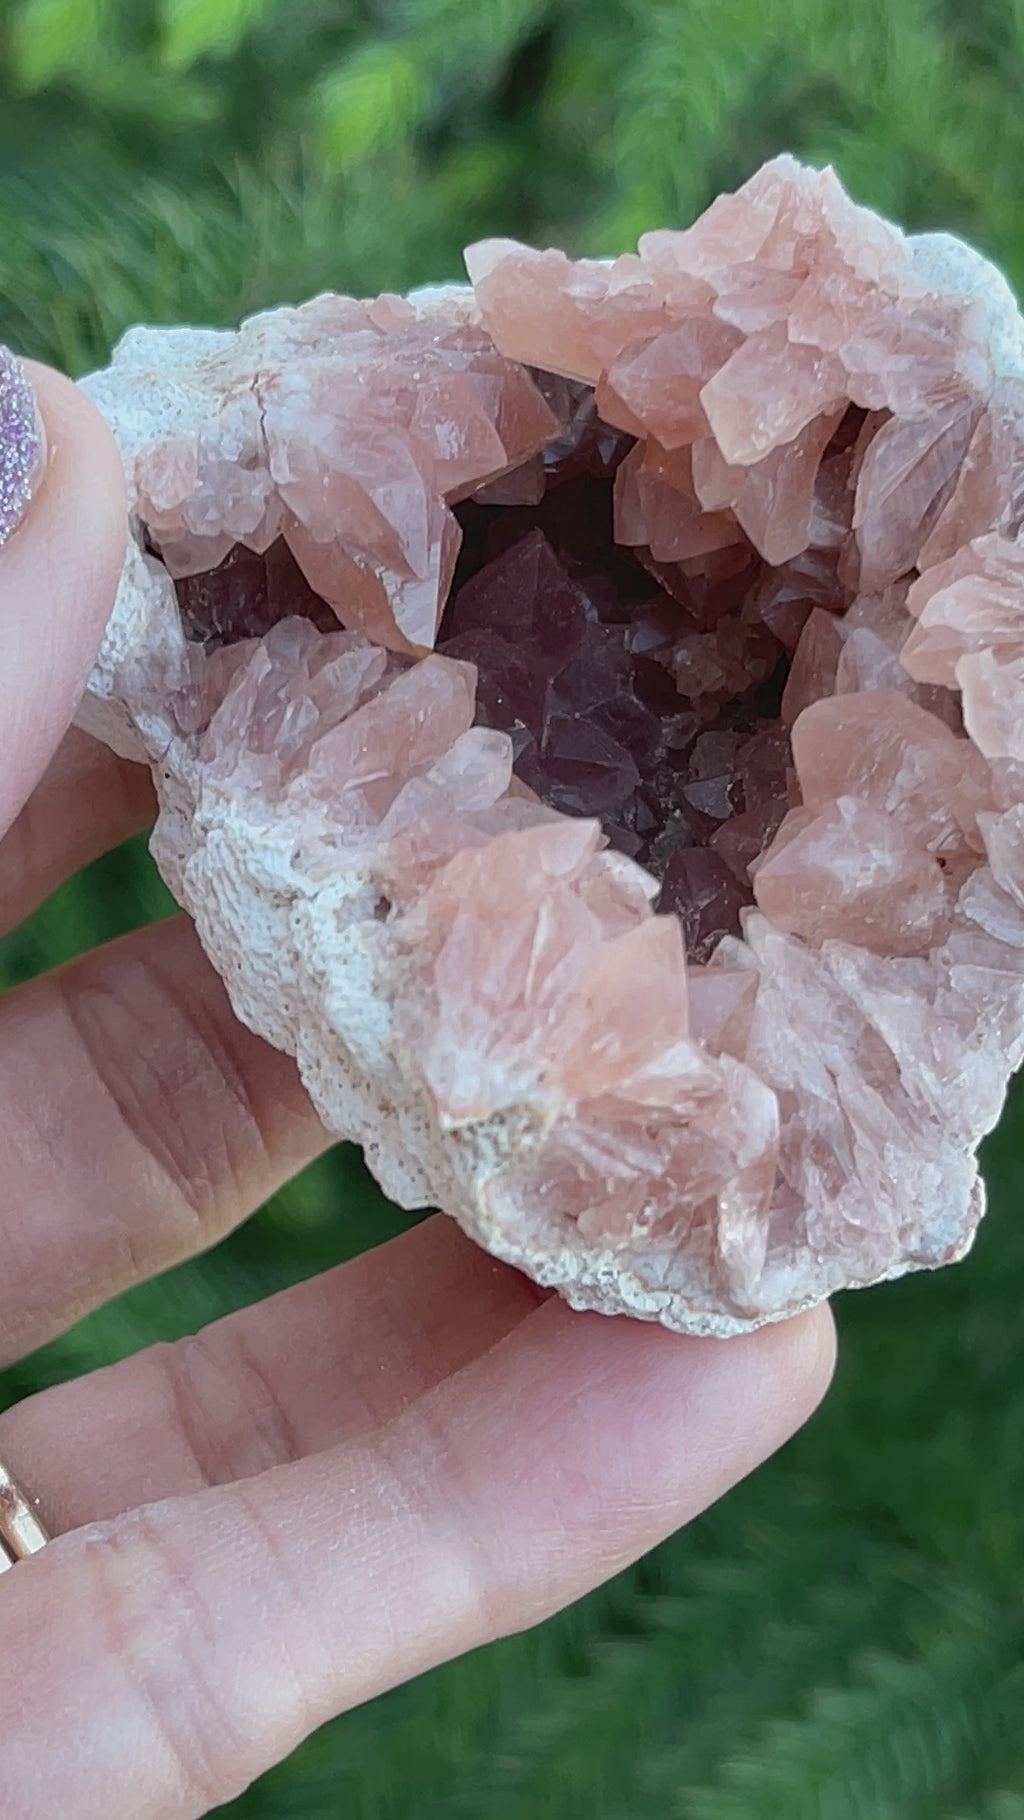 Thank you for considering purchasing this beautiful Pink Amethyst Crystals Geode from CrystalRockology. Please buy with confidence that you are buying from reputable sellers that place a high priority on transparency and integrity. 